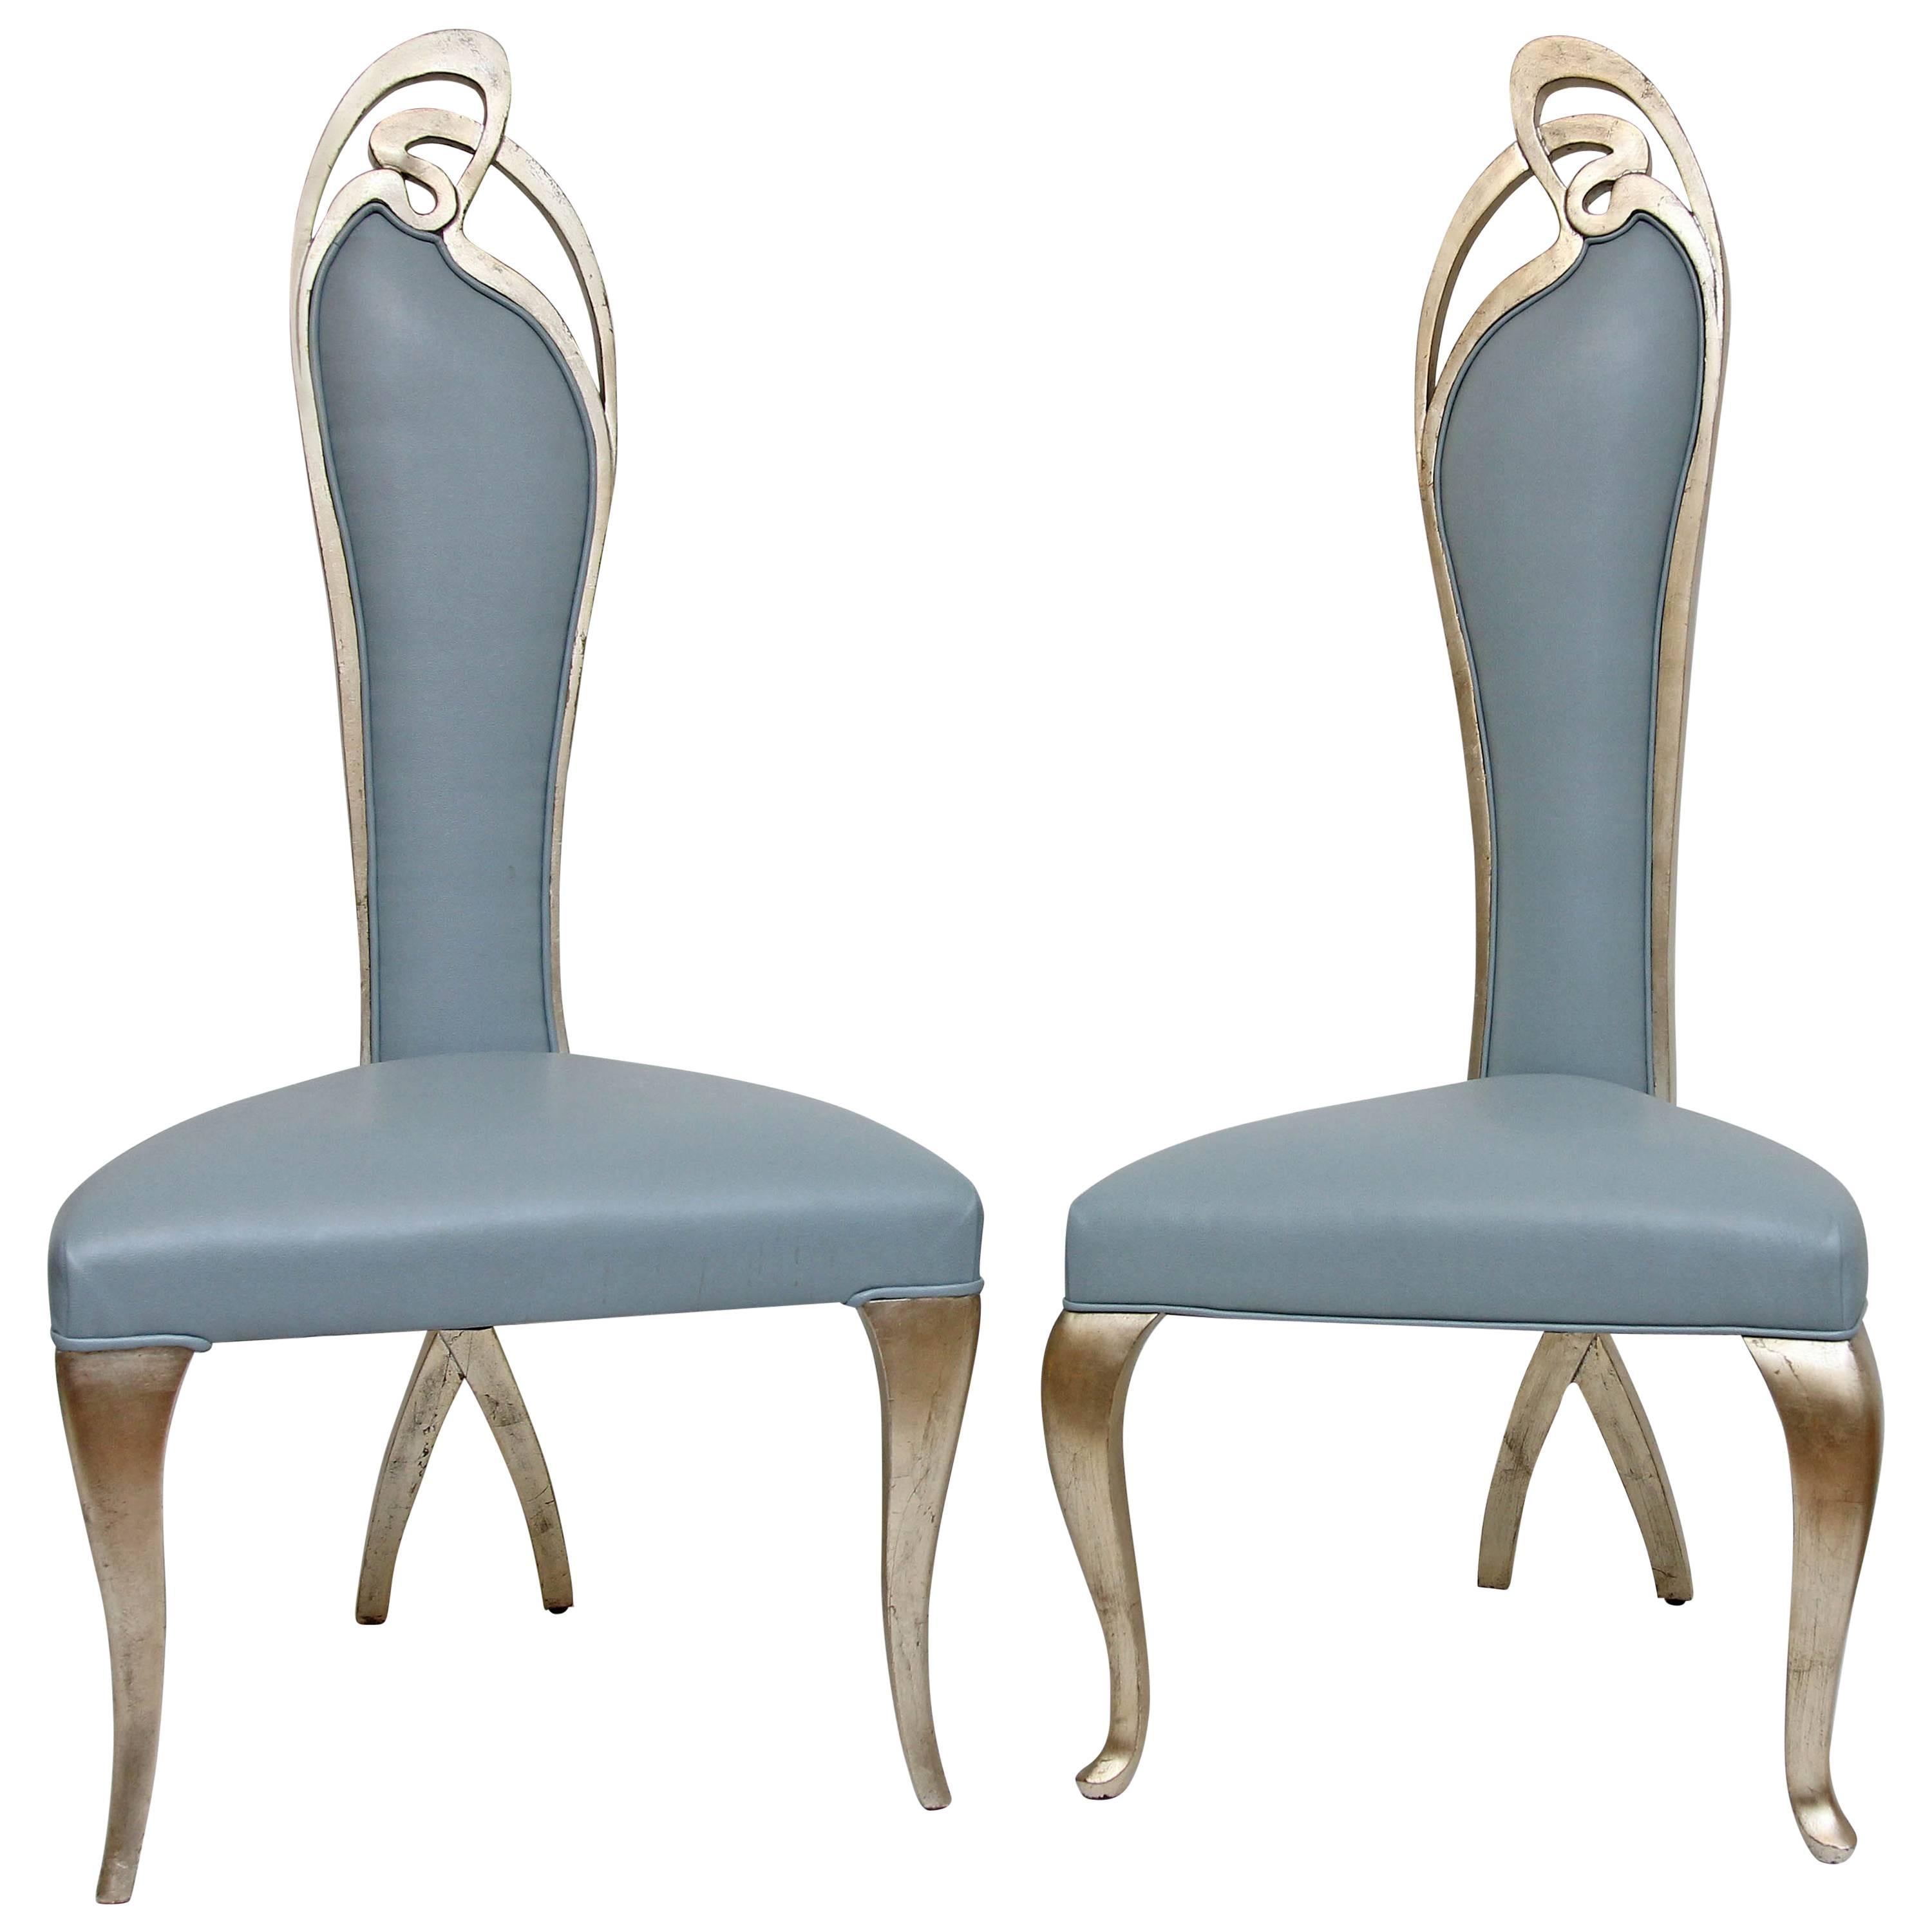 Pair of Modernist Giltwood Chairs